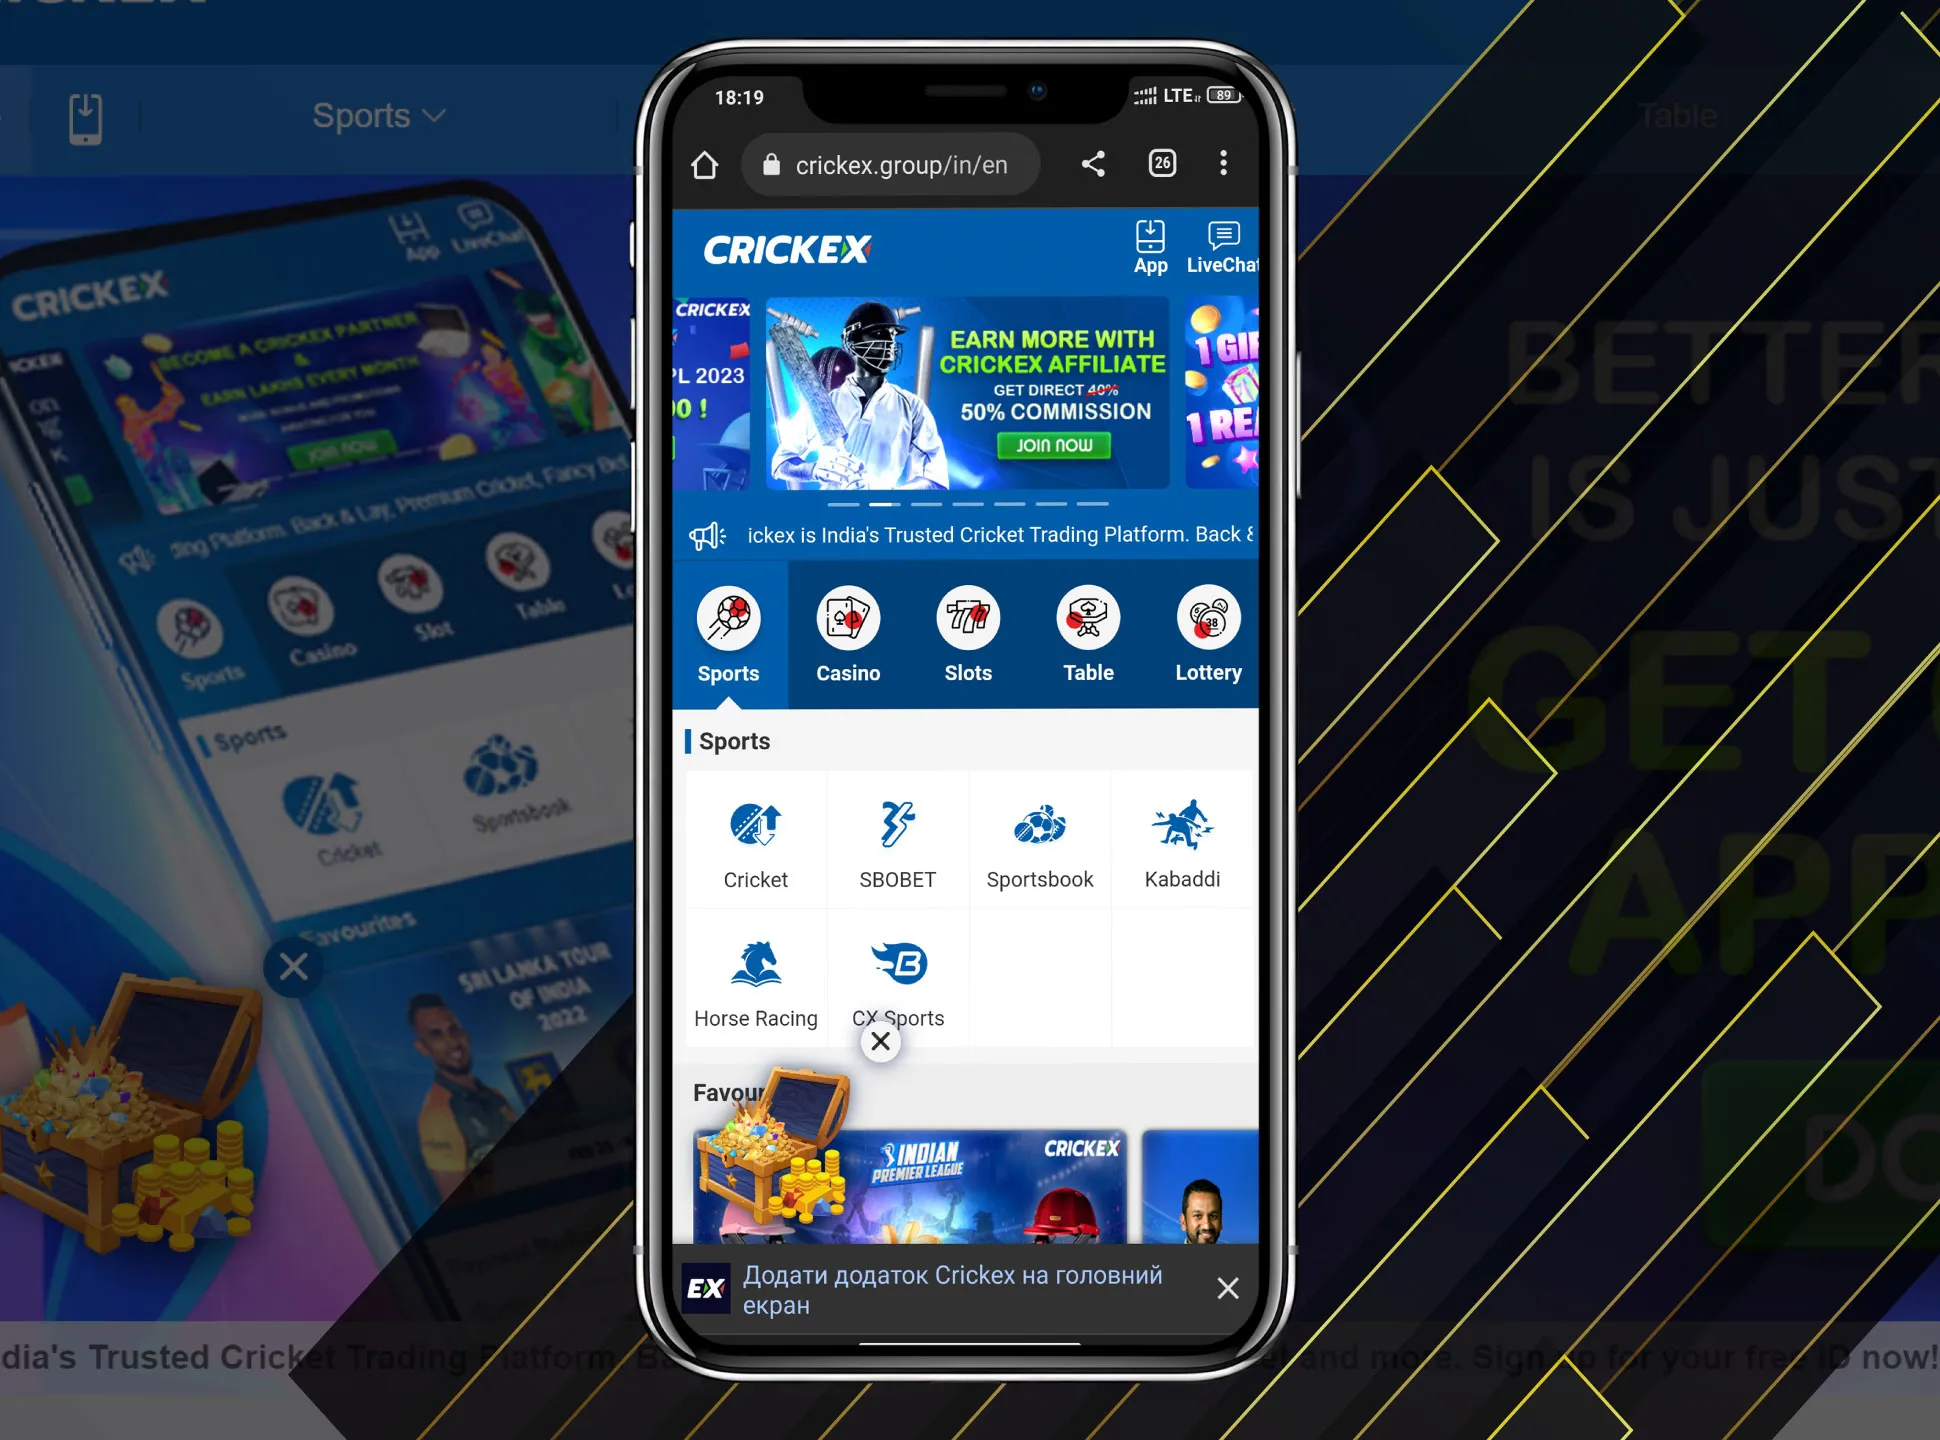 Crickex has designed a great mobile app for sports betting and casino playing that has all the necessary features.